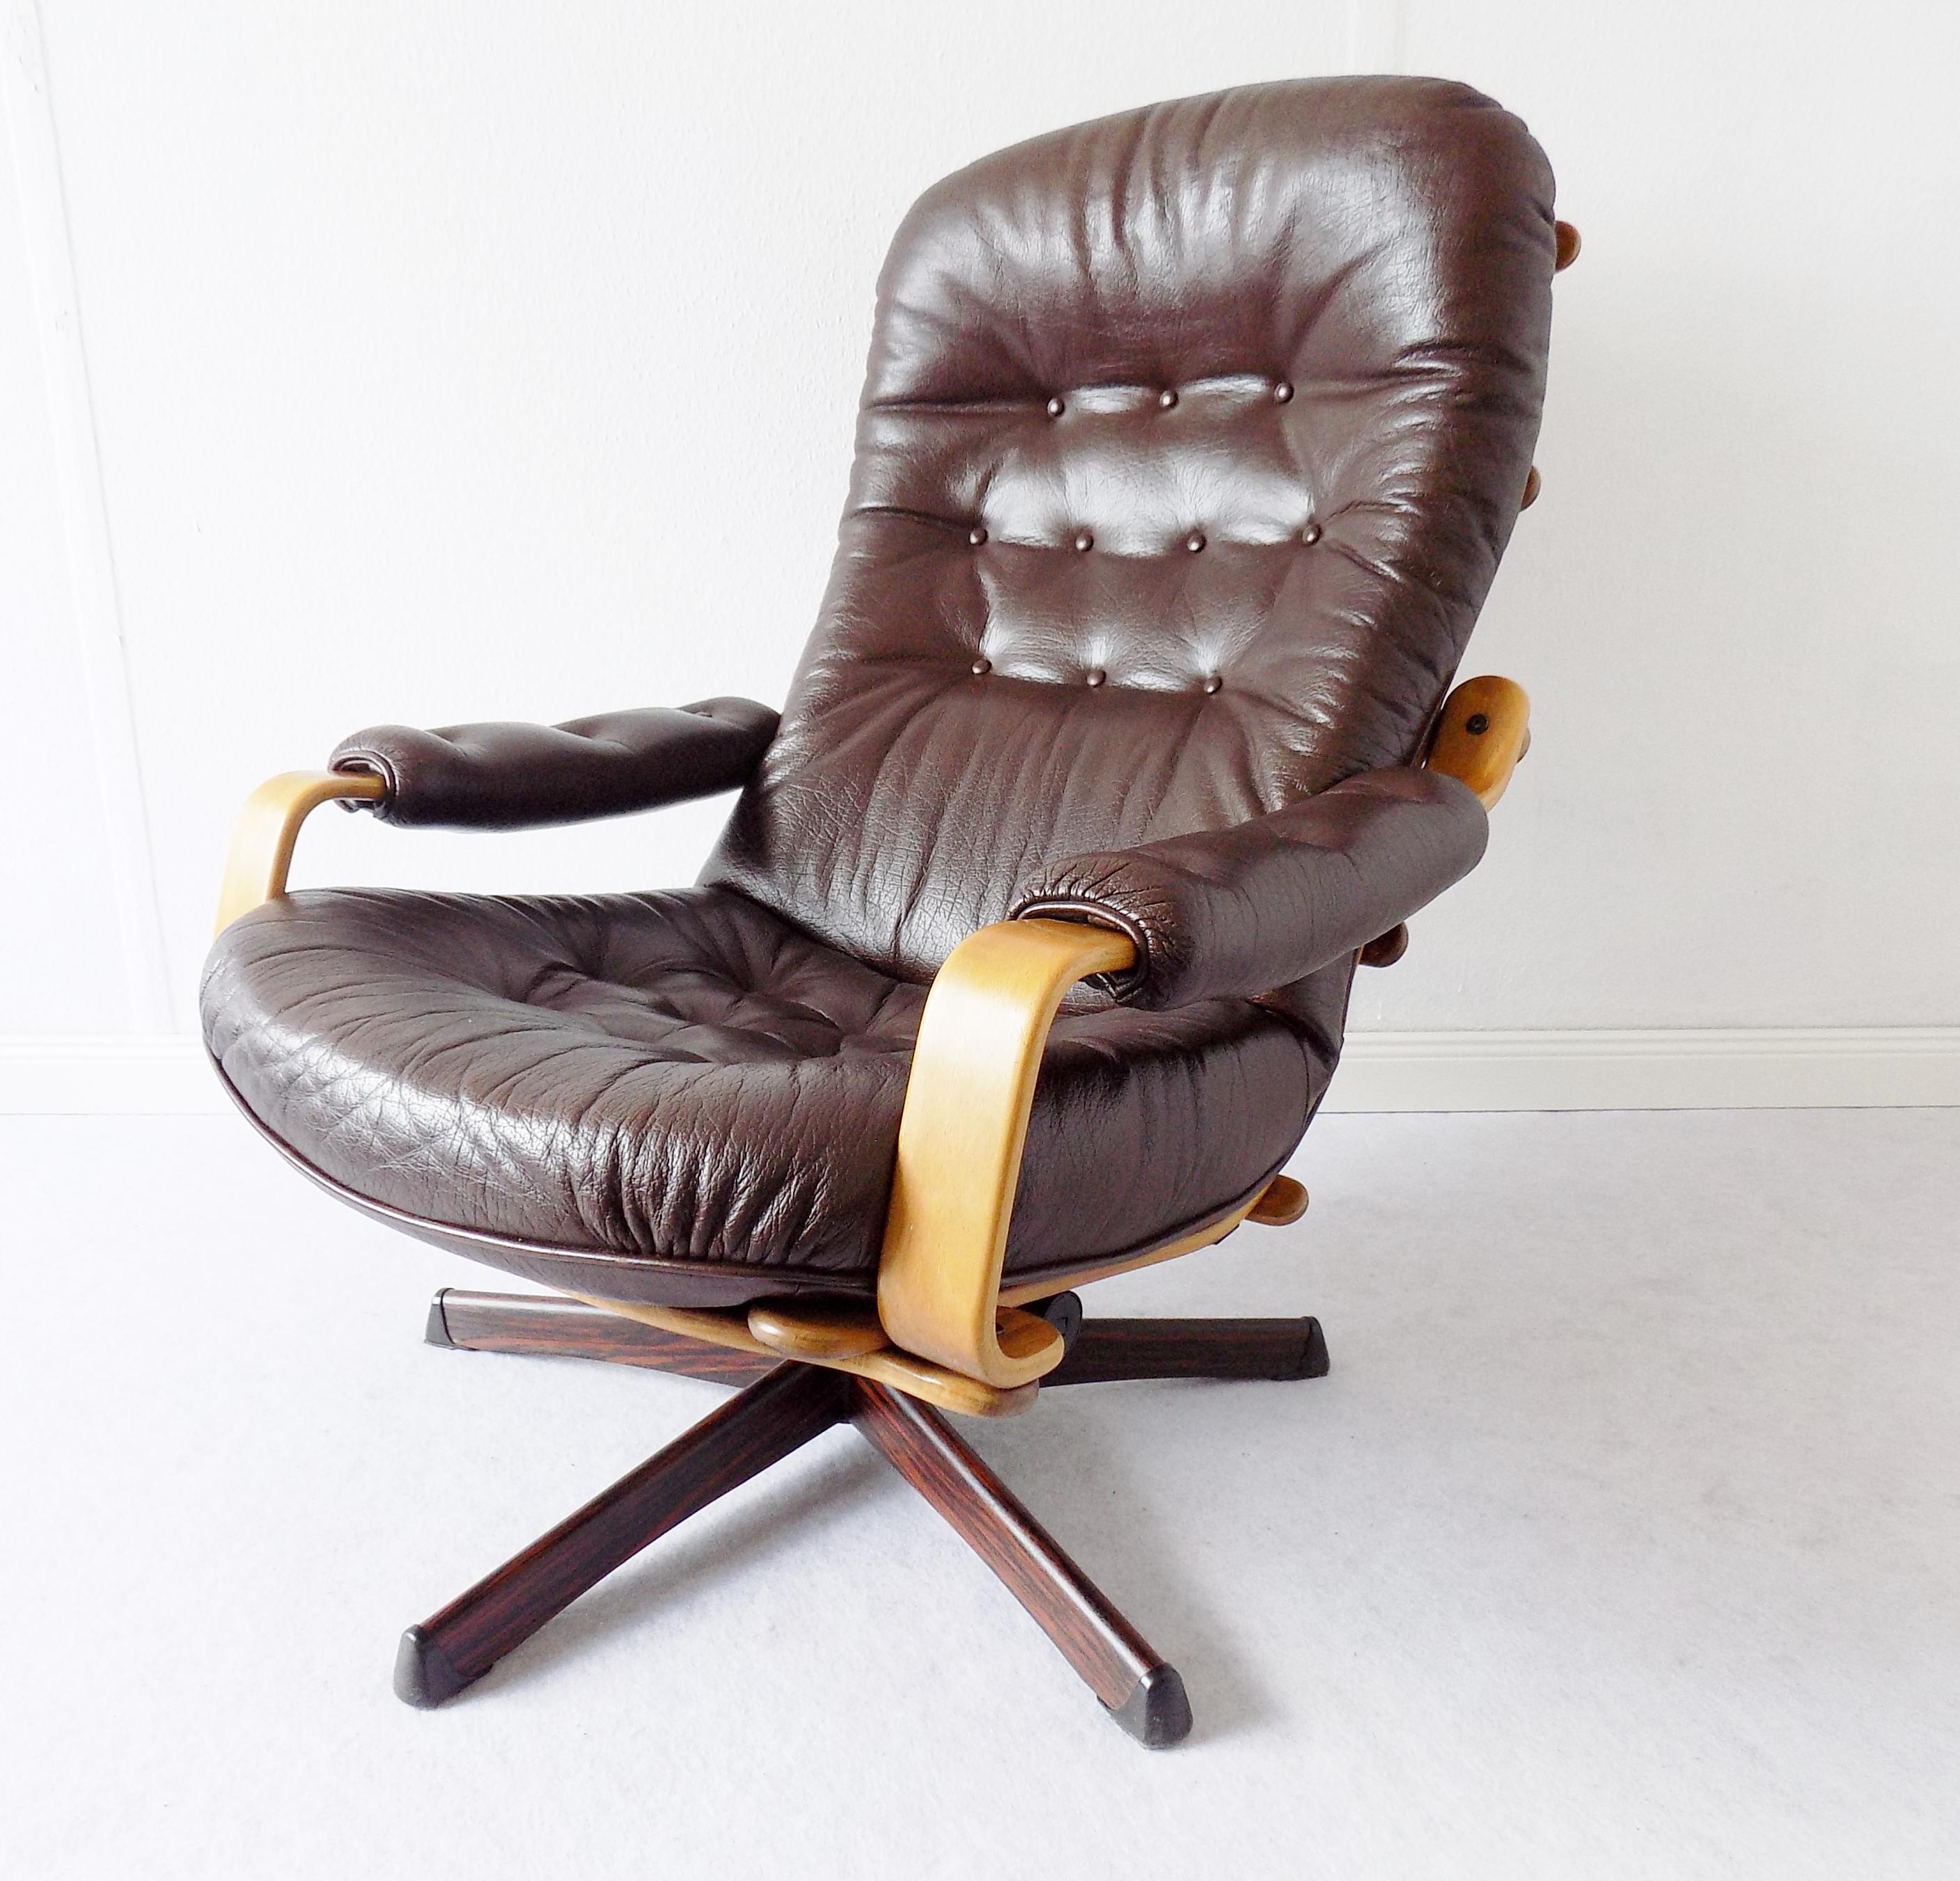 Göte Möbler Lounge Chair , Swedish Design, Mid-Century modern, Swivel, Leather

This Göte Möbler lounge chair, made from brown leather and a very nice looking wooden frame, is in very good condition. Rosewood effect on the base, leather, wood in